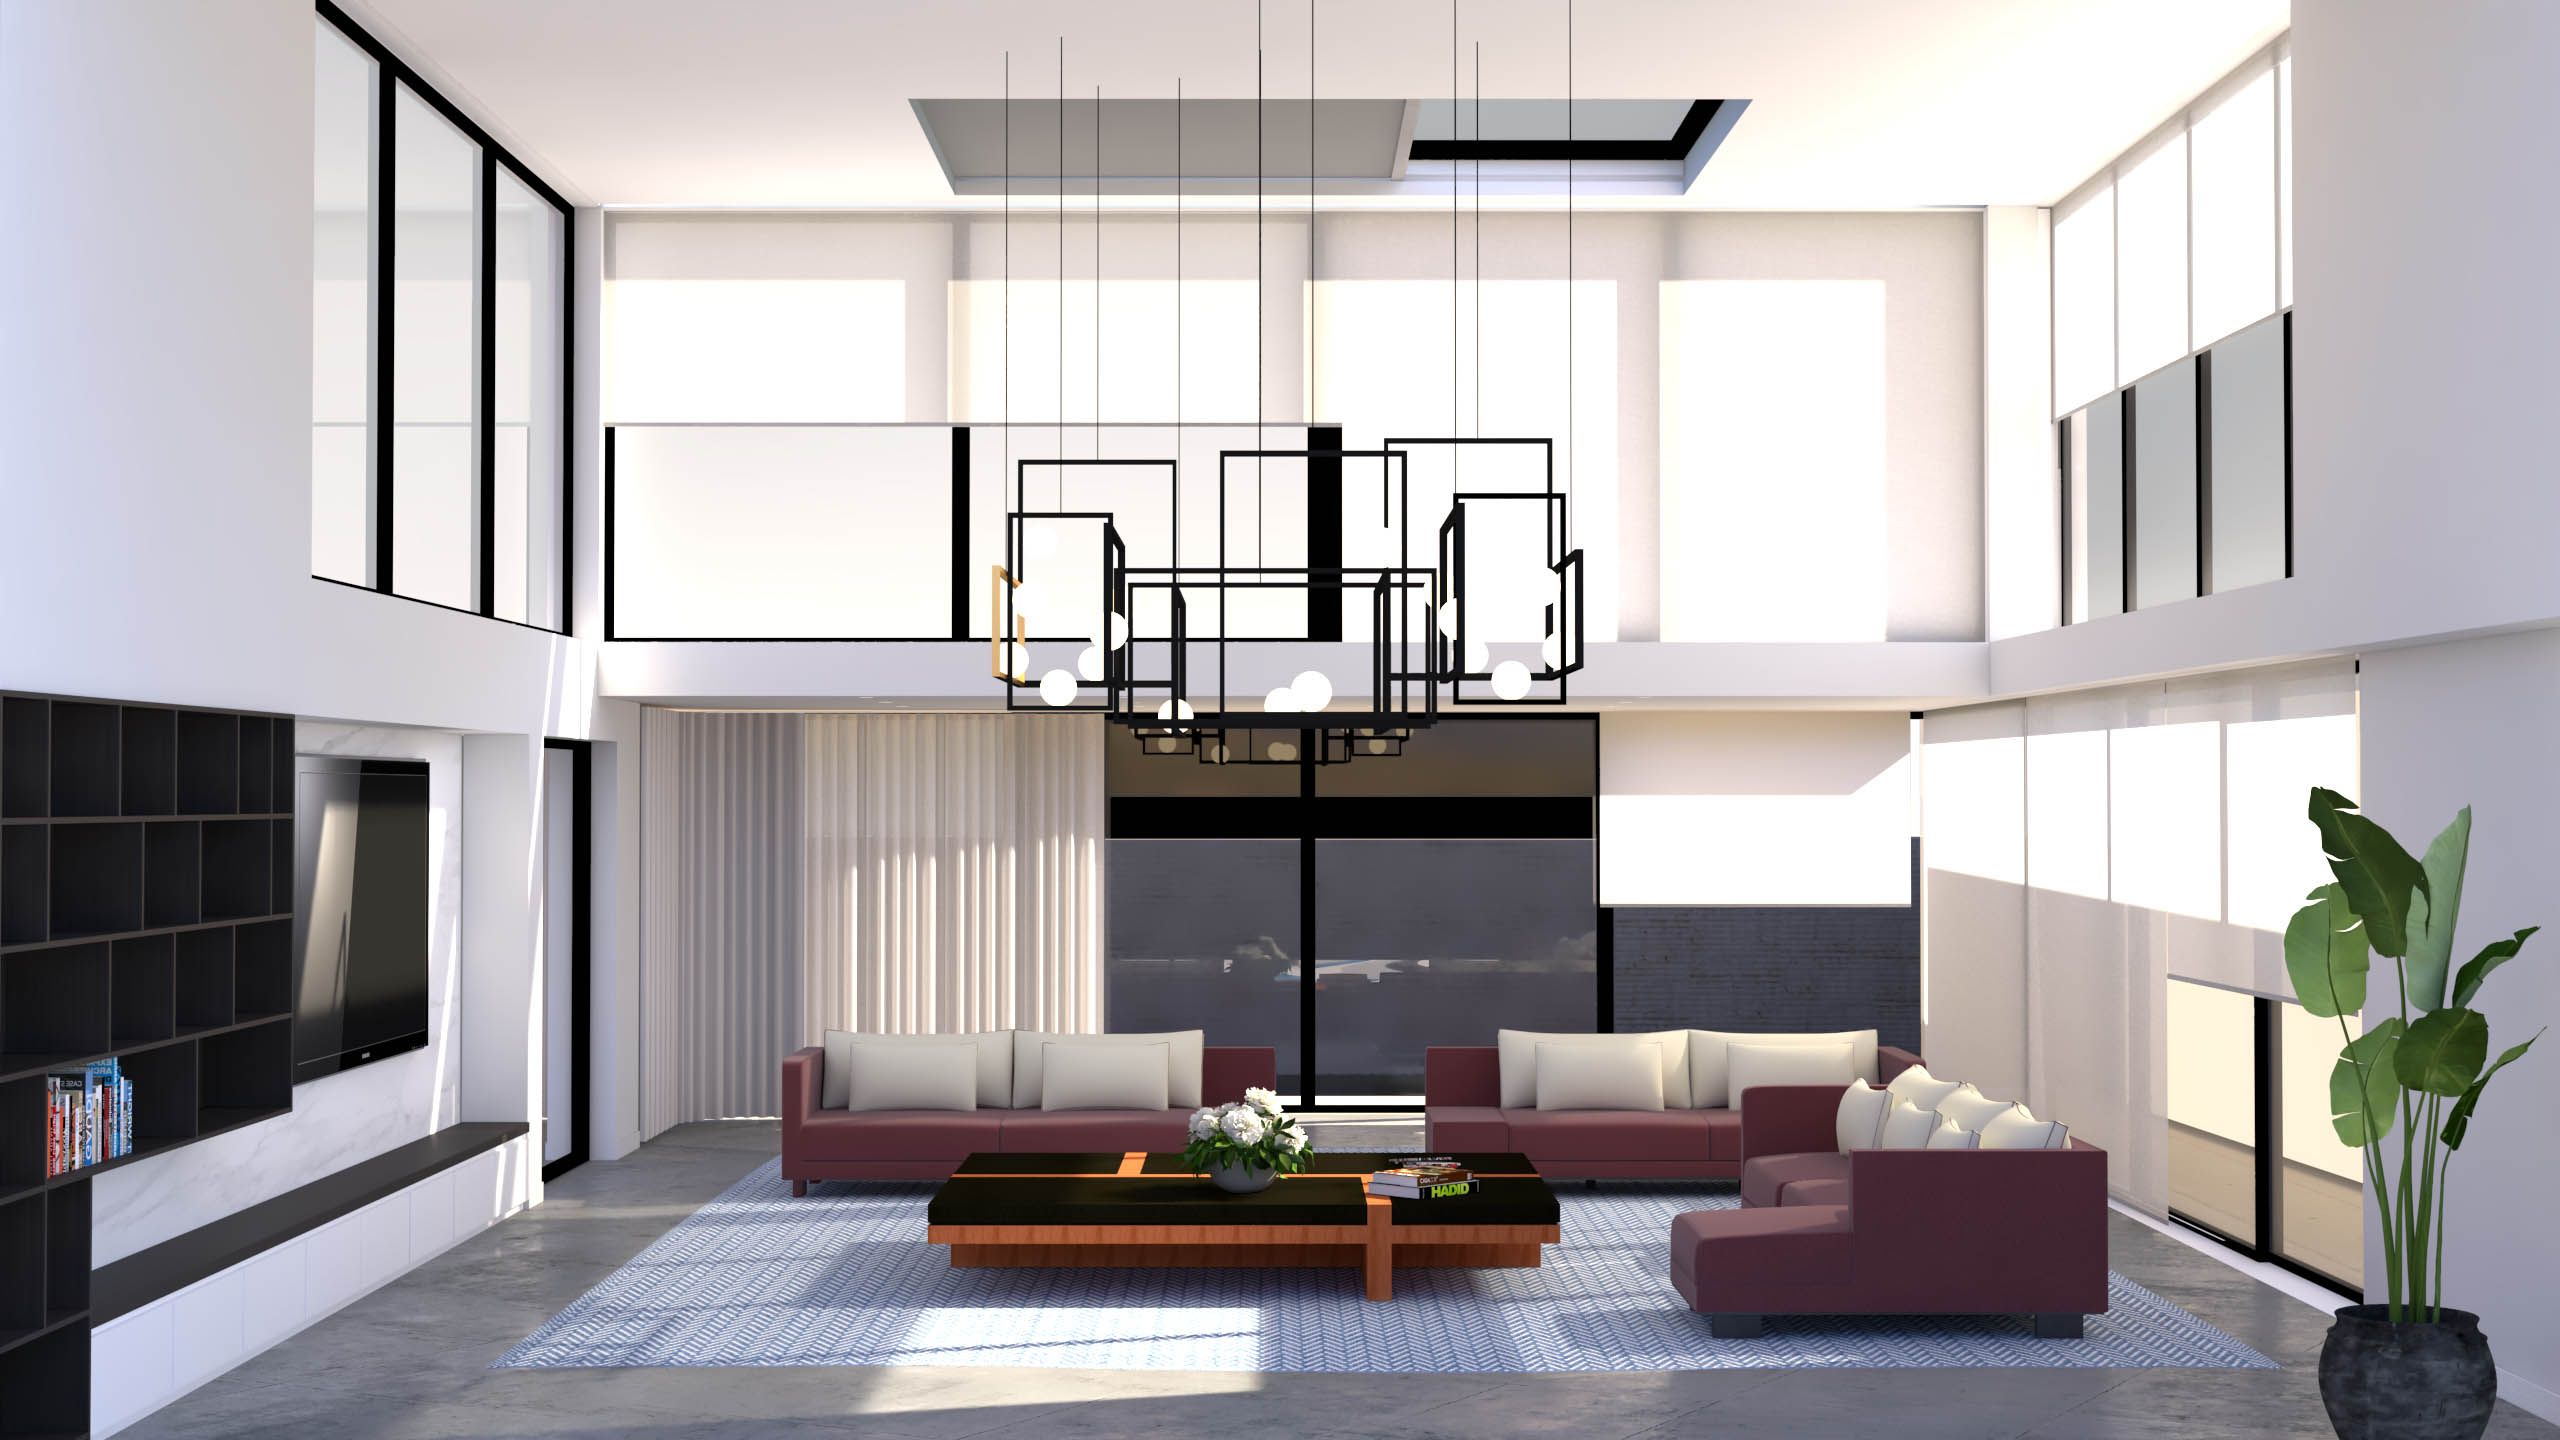 Blindspace Residential Integration Ideas - Blinds, Curtains, Skylights